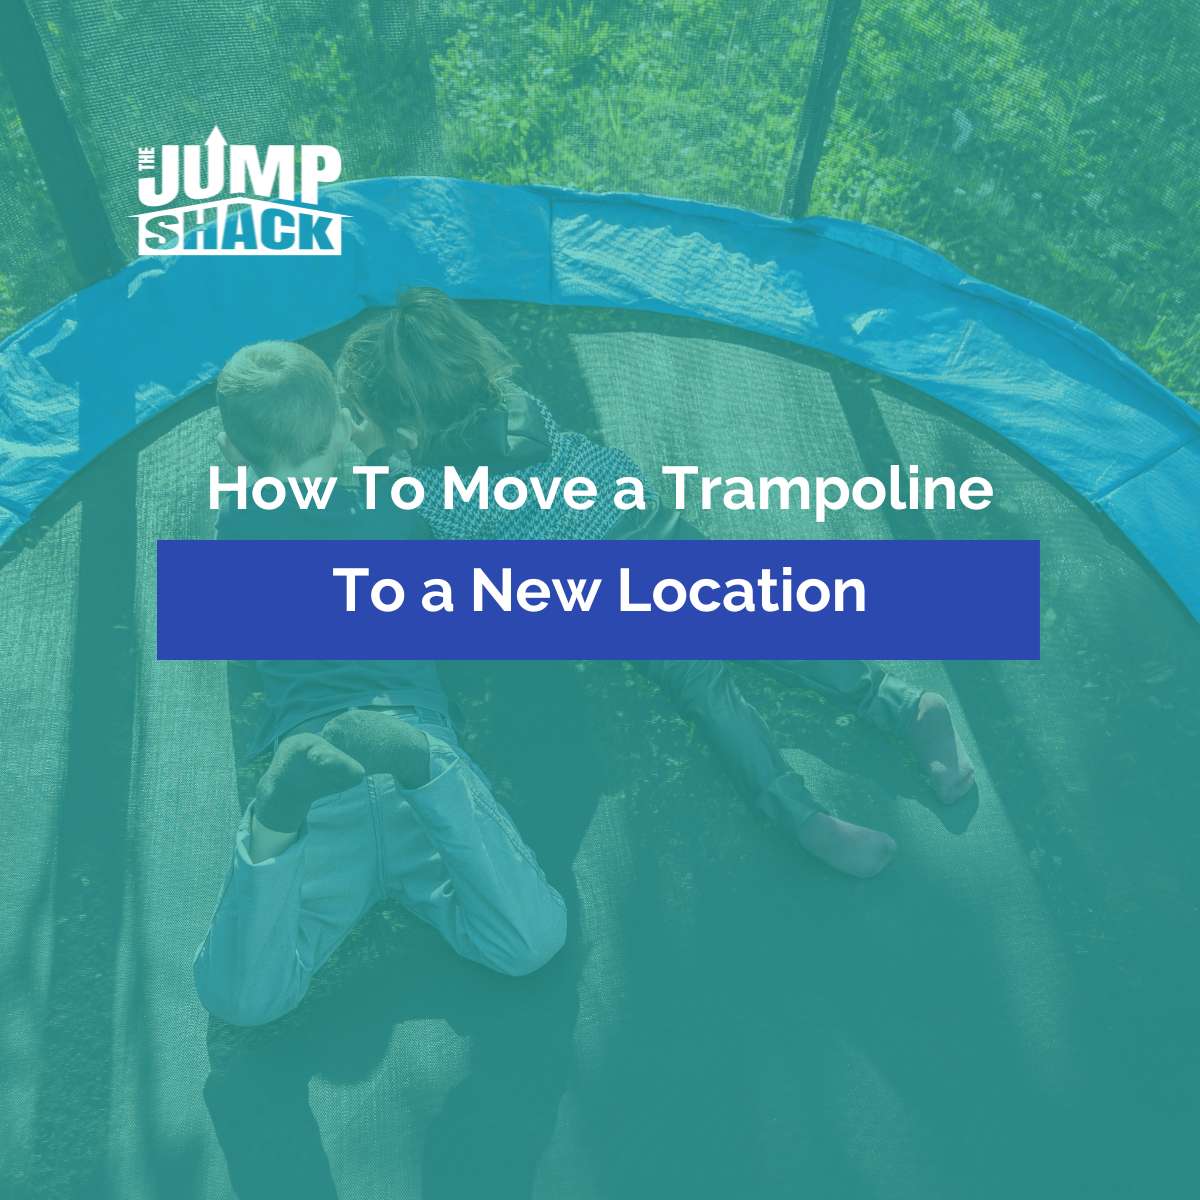 How To Move a Trampoline To a New Location